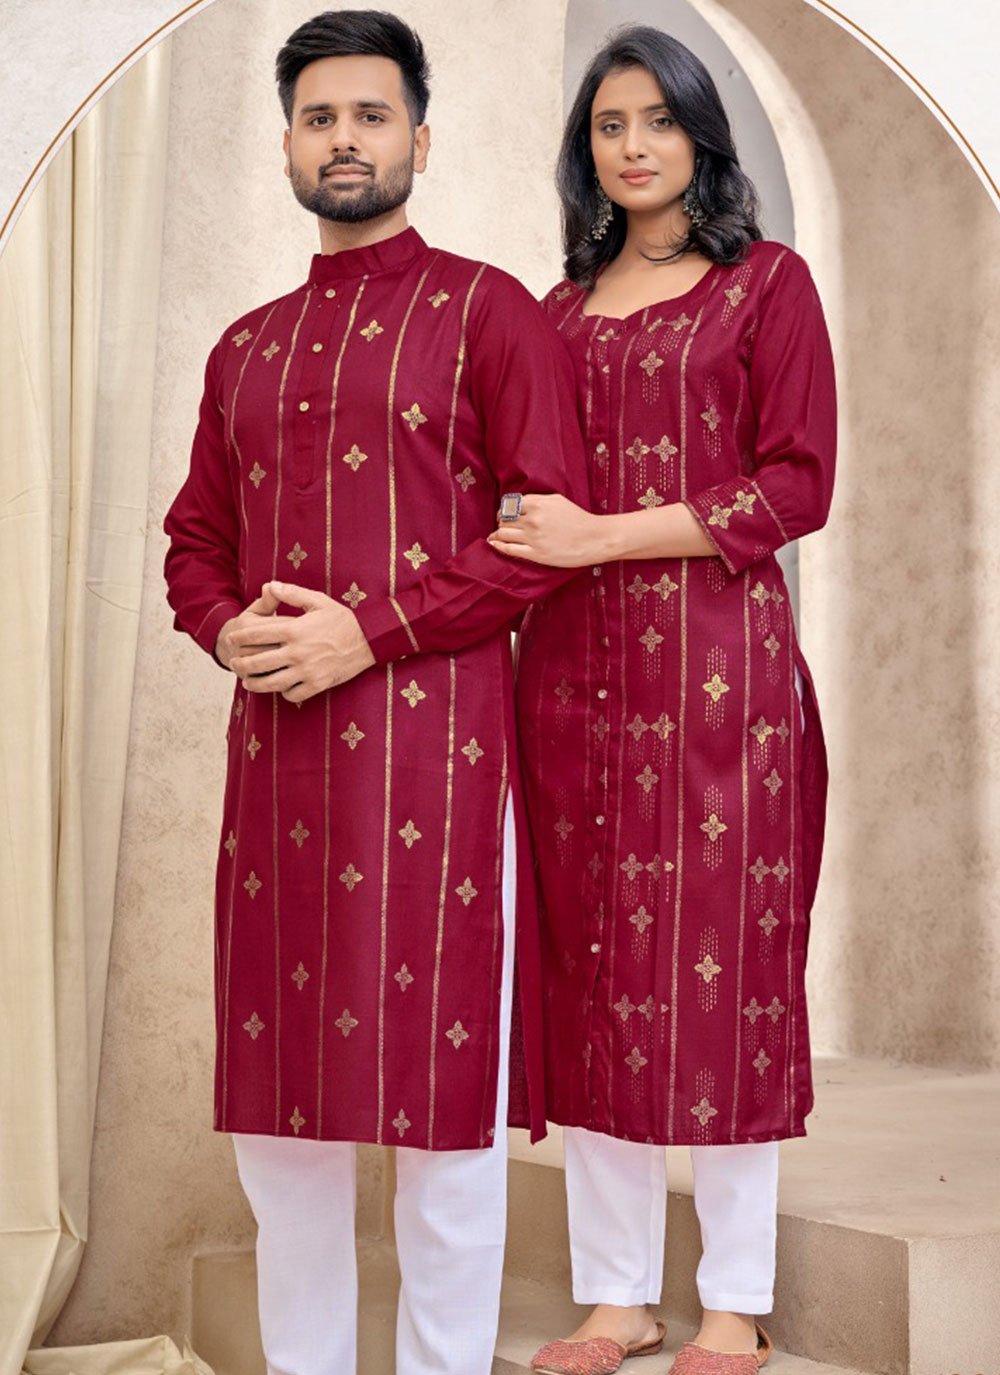 Couple Combo Dress Online - Shop online women fashion, indo-western, ethnic  wear, sari, suits, kurtis, watches, gifts.